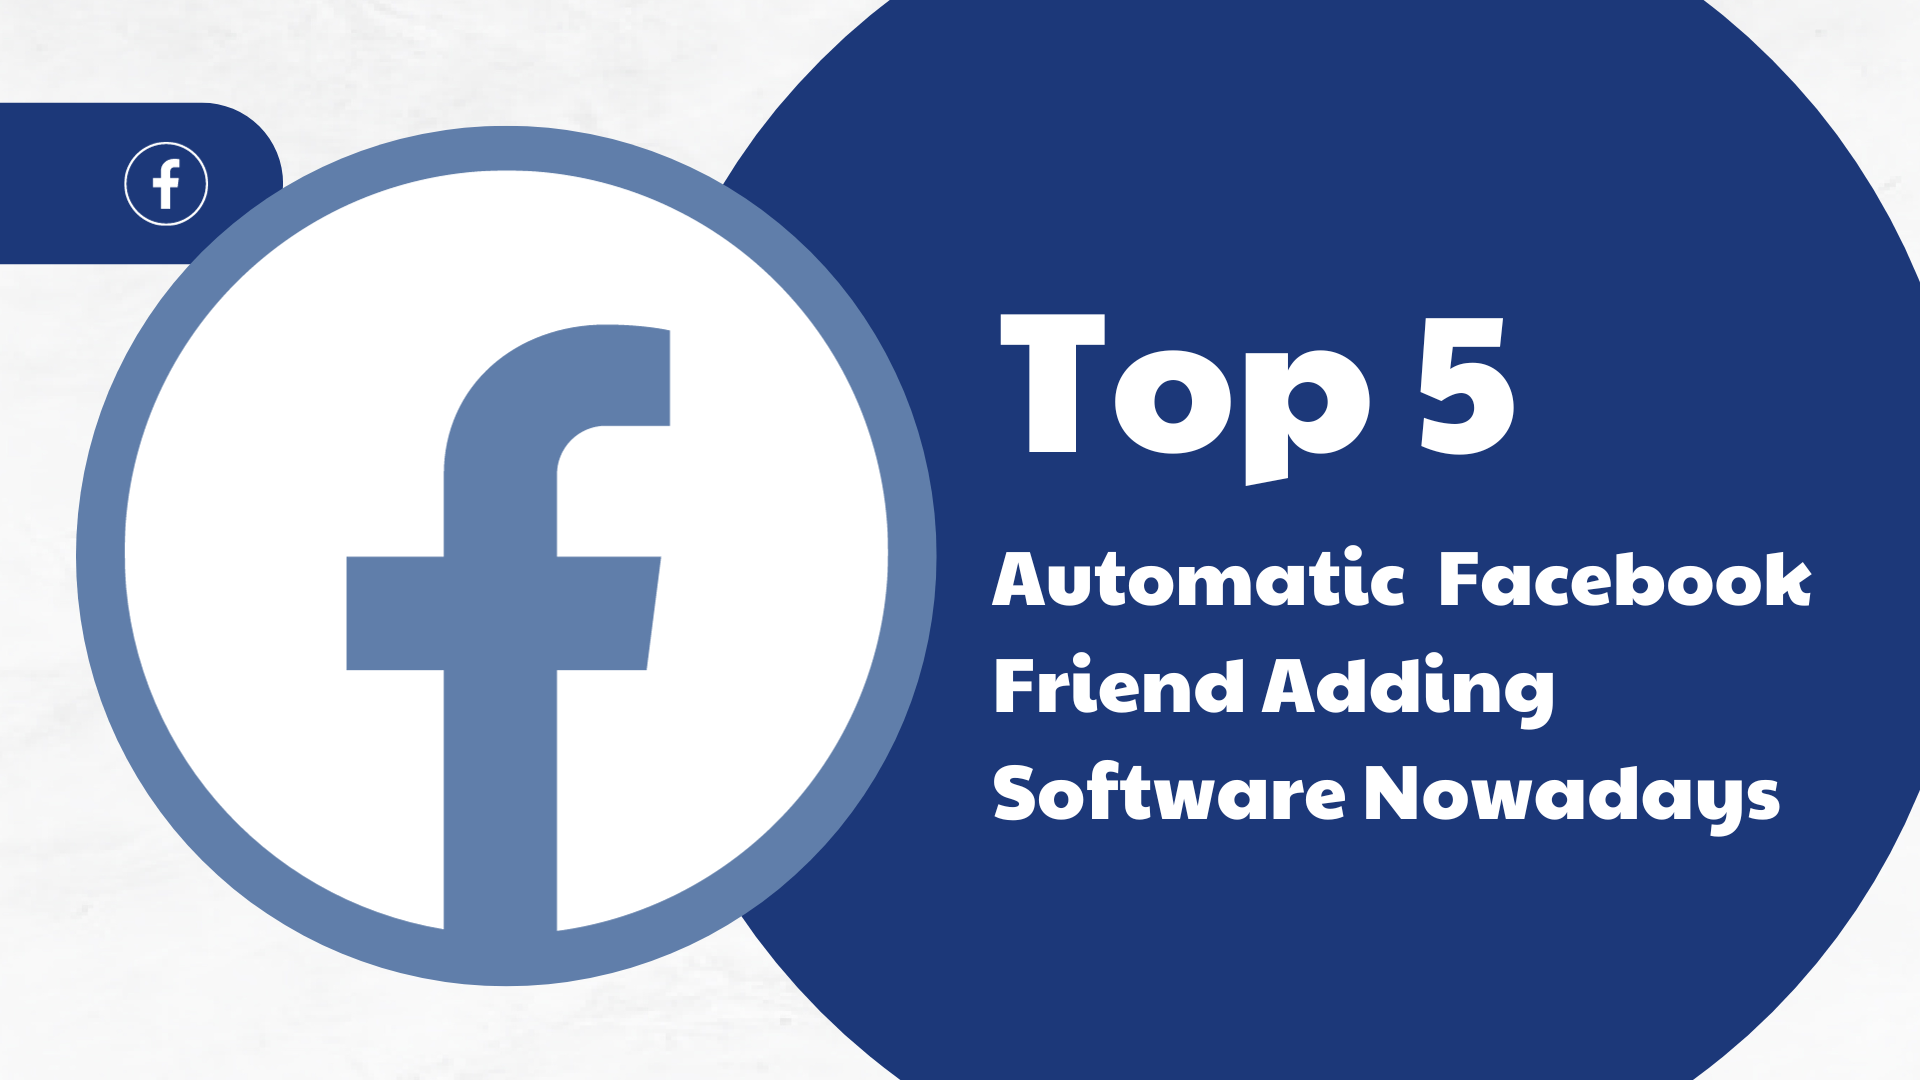 Top 5 Automatic Facebook Friend Adding Software Nowadays